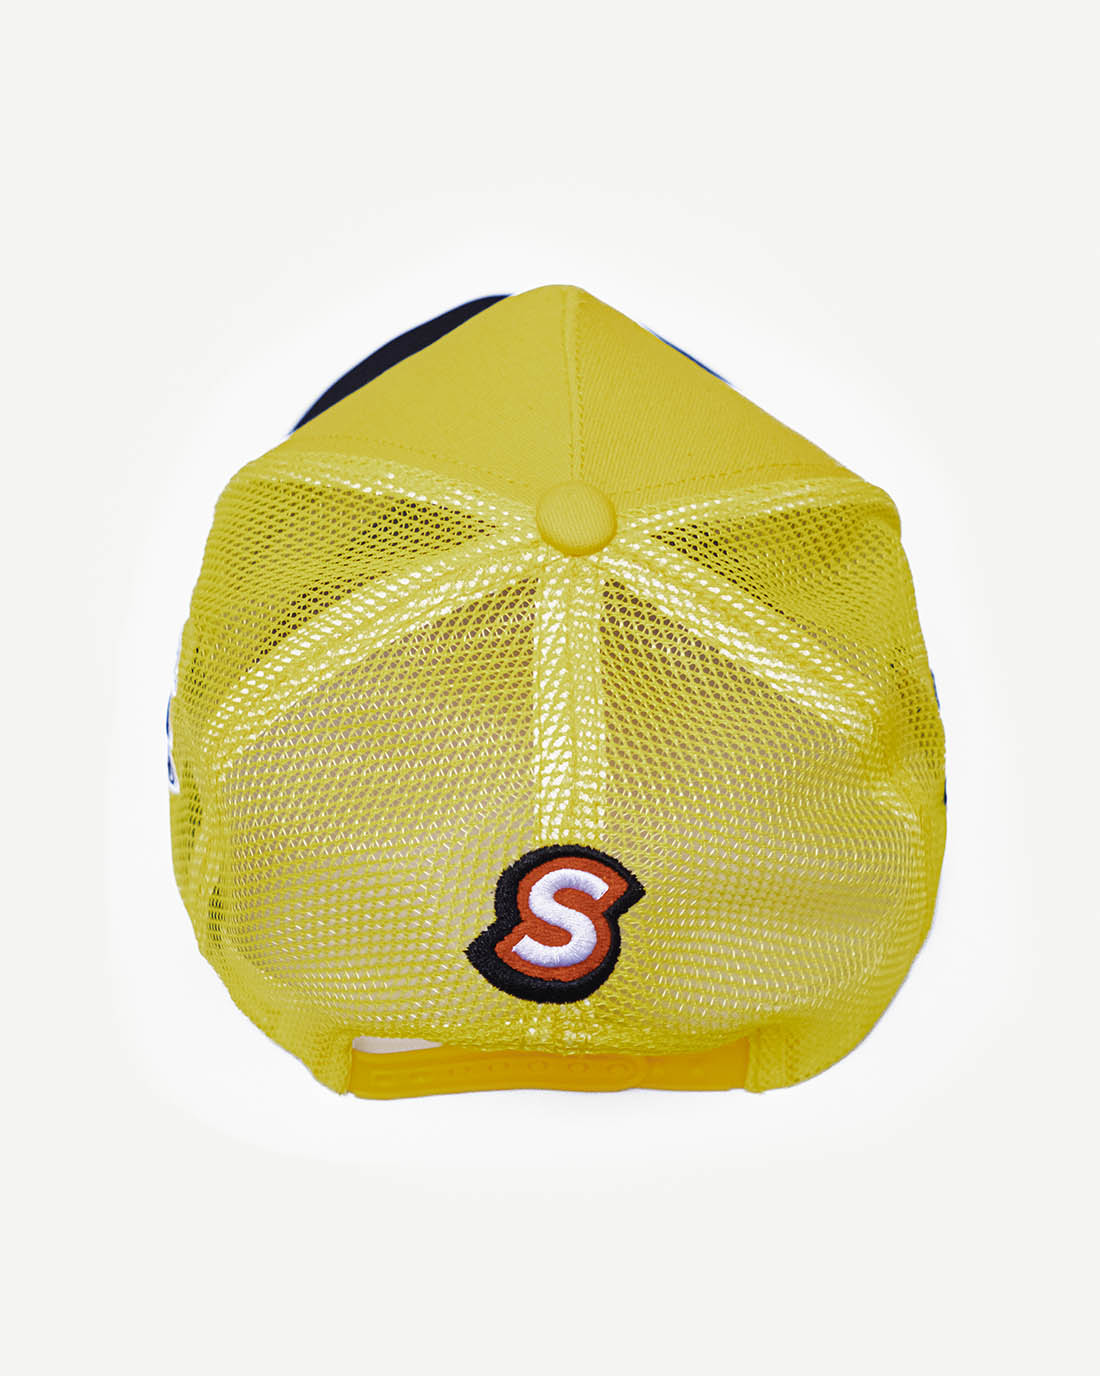 Rear view of a two-tone black and yellow snapback hat with stylish racing-inspired embroidered design and cooling mesh back.